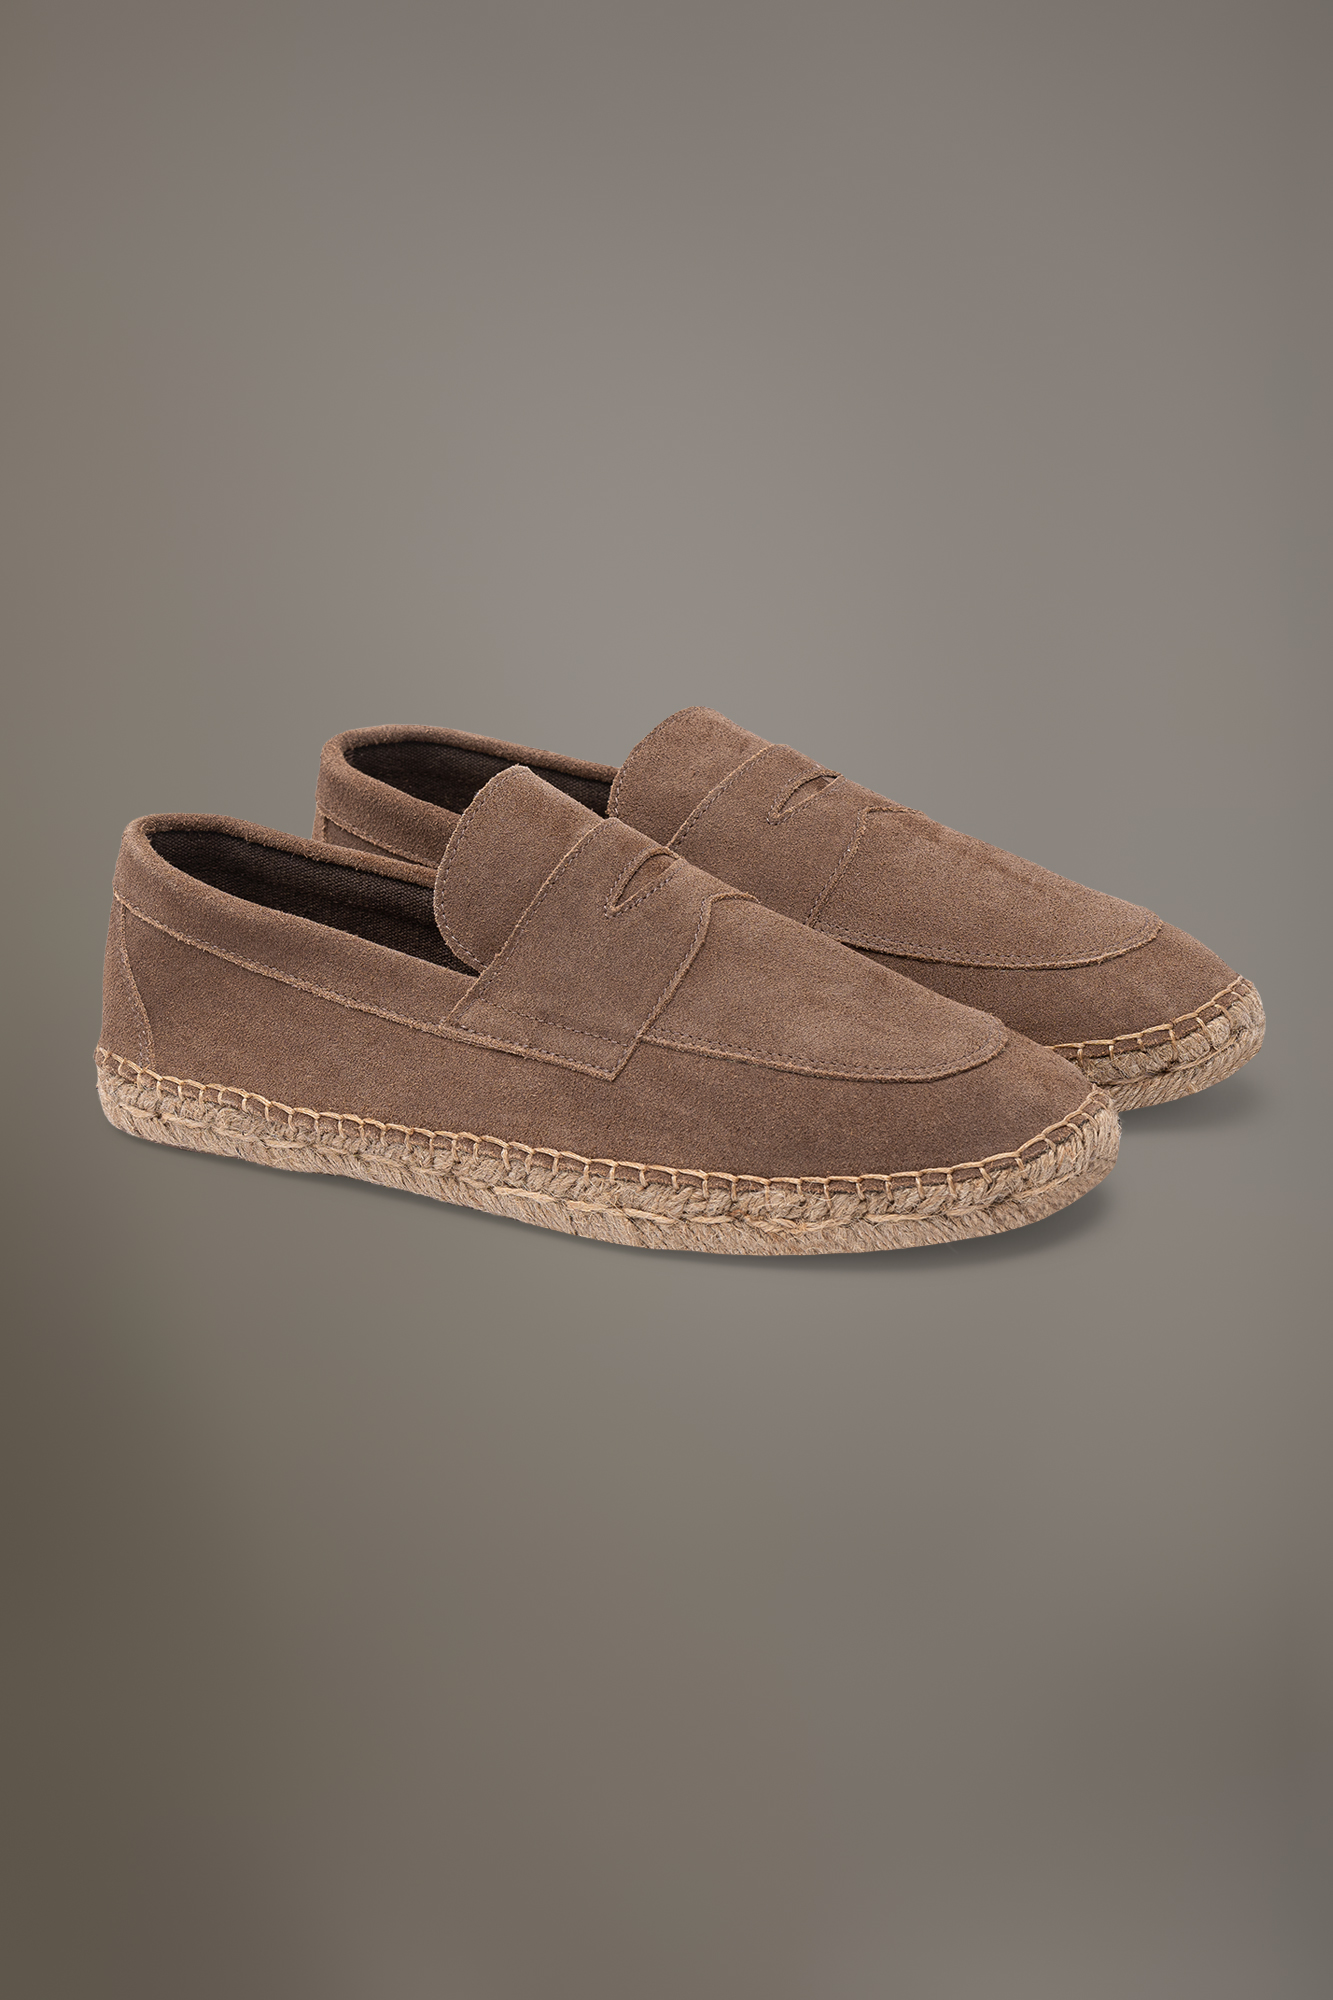 Suede espadrillas shoes 100% leather with rubber and cord sole image number null